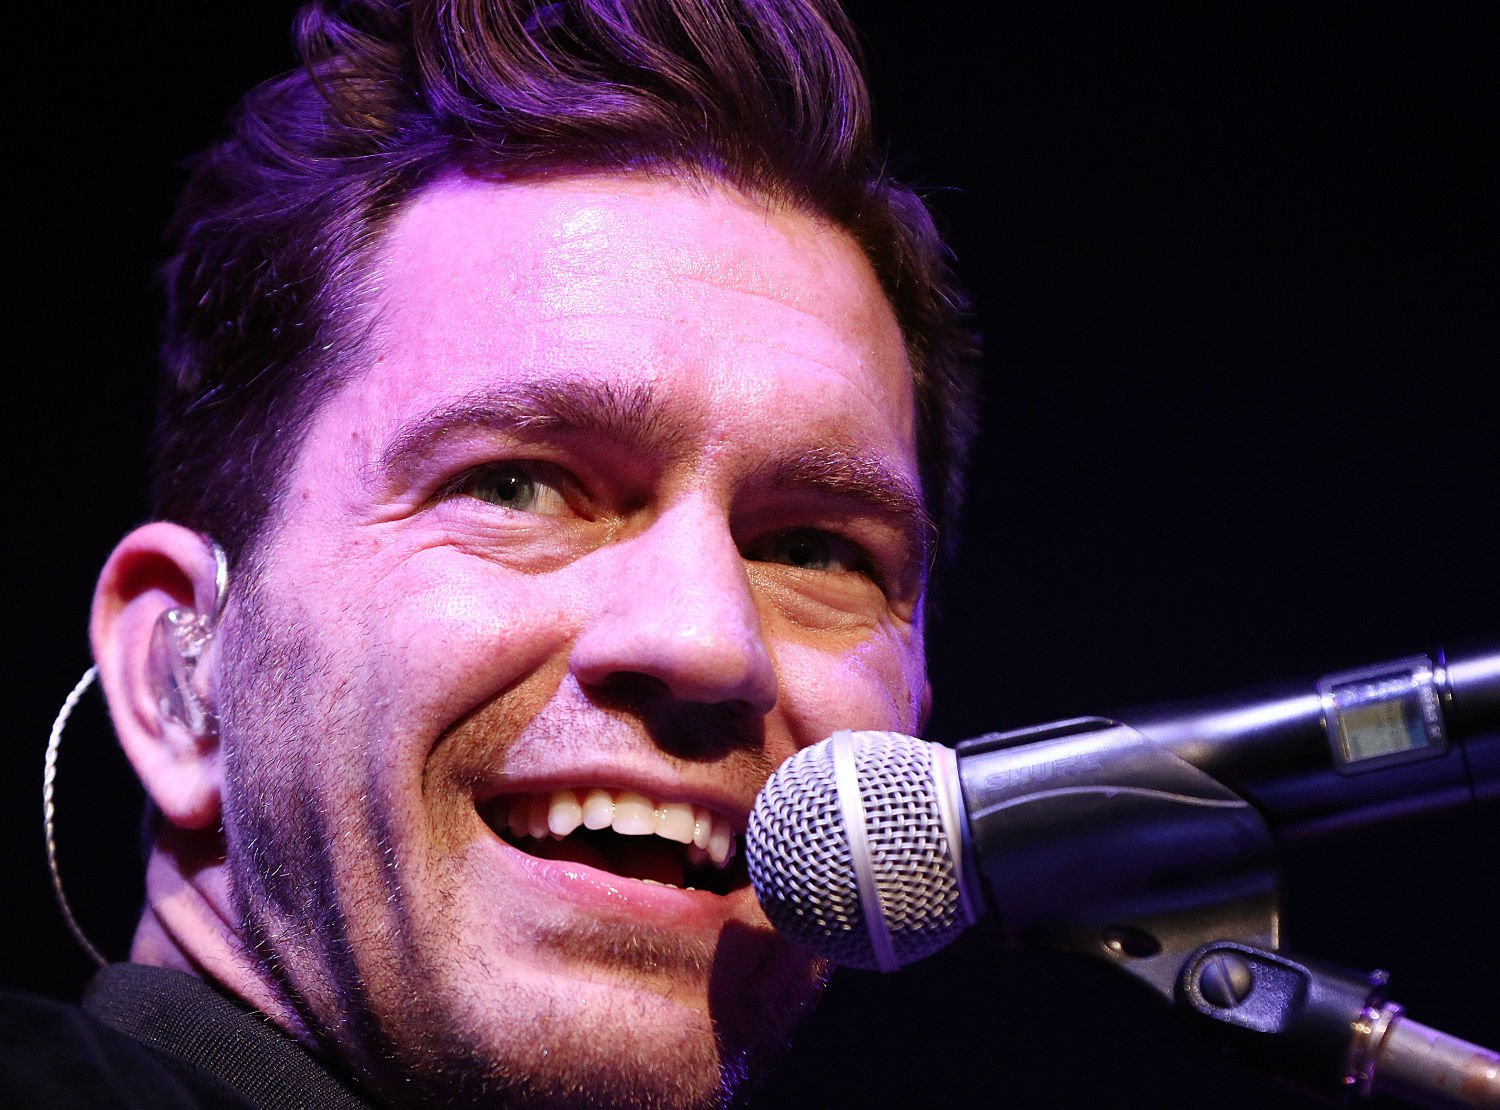 andy grammer